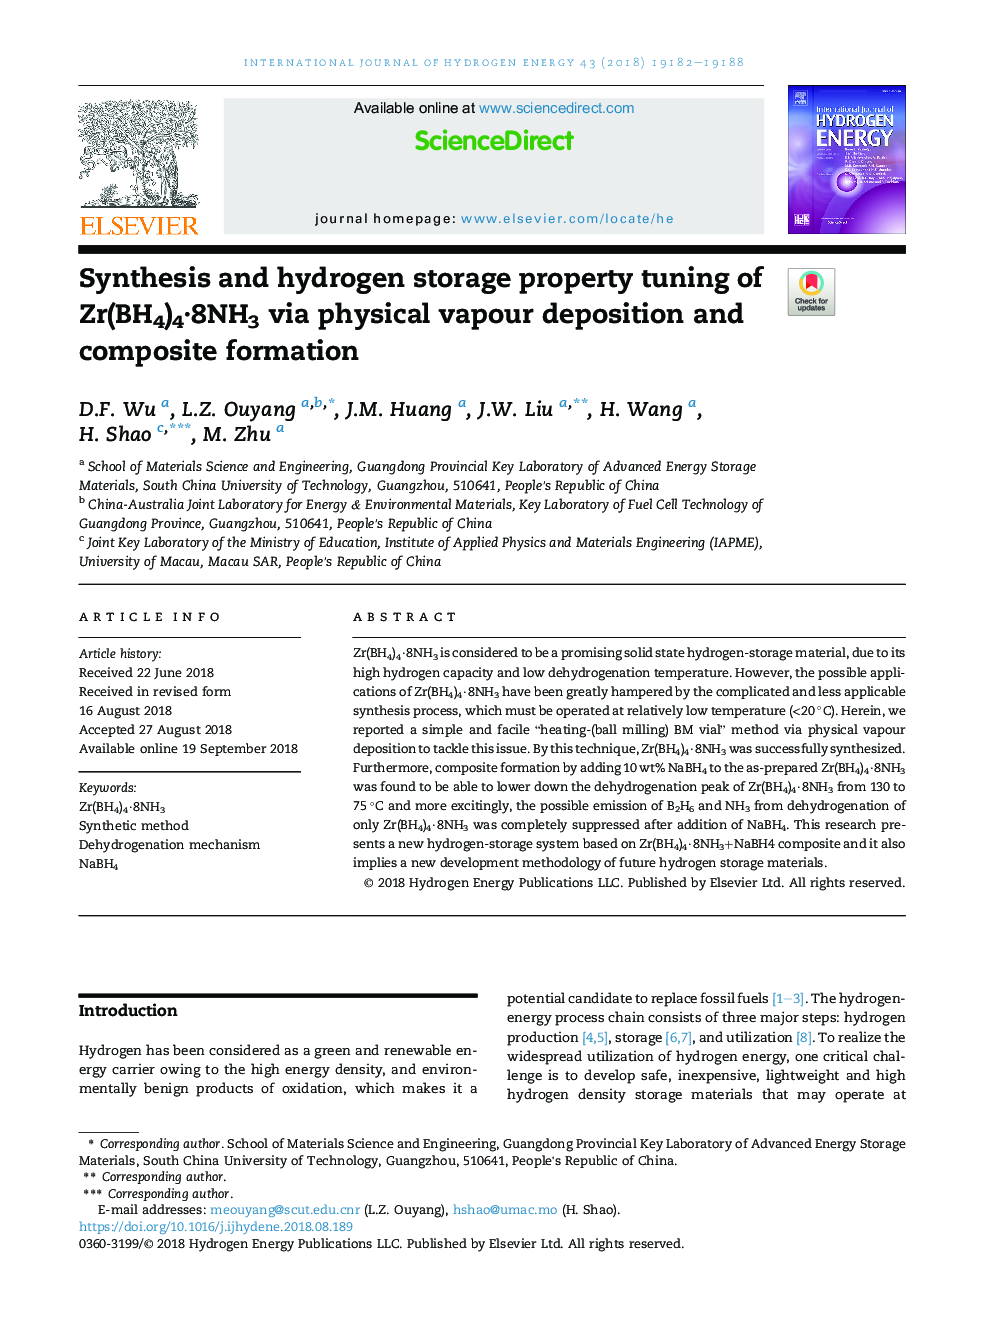 Synthesis and hydrogen storage property tuning of Zr(BH4)4Â·8NH3 via physical vapour deposition and composite formation